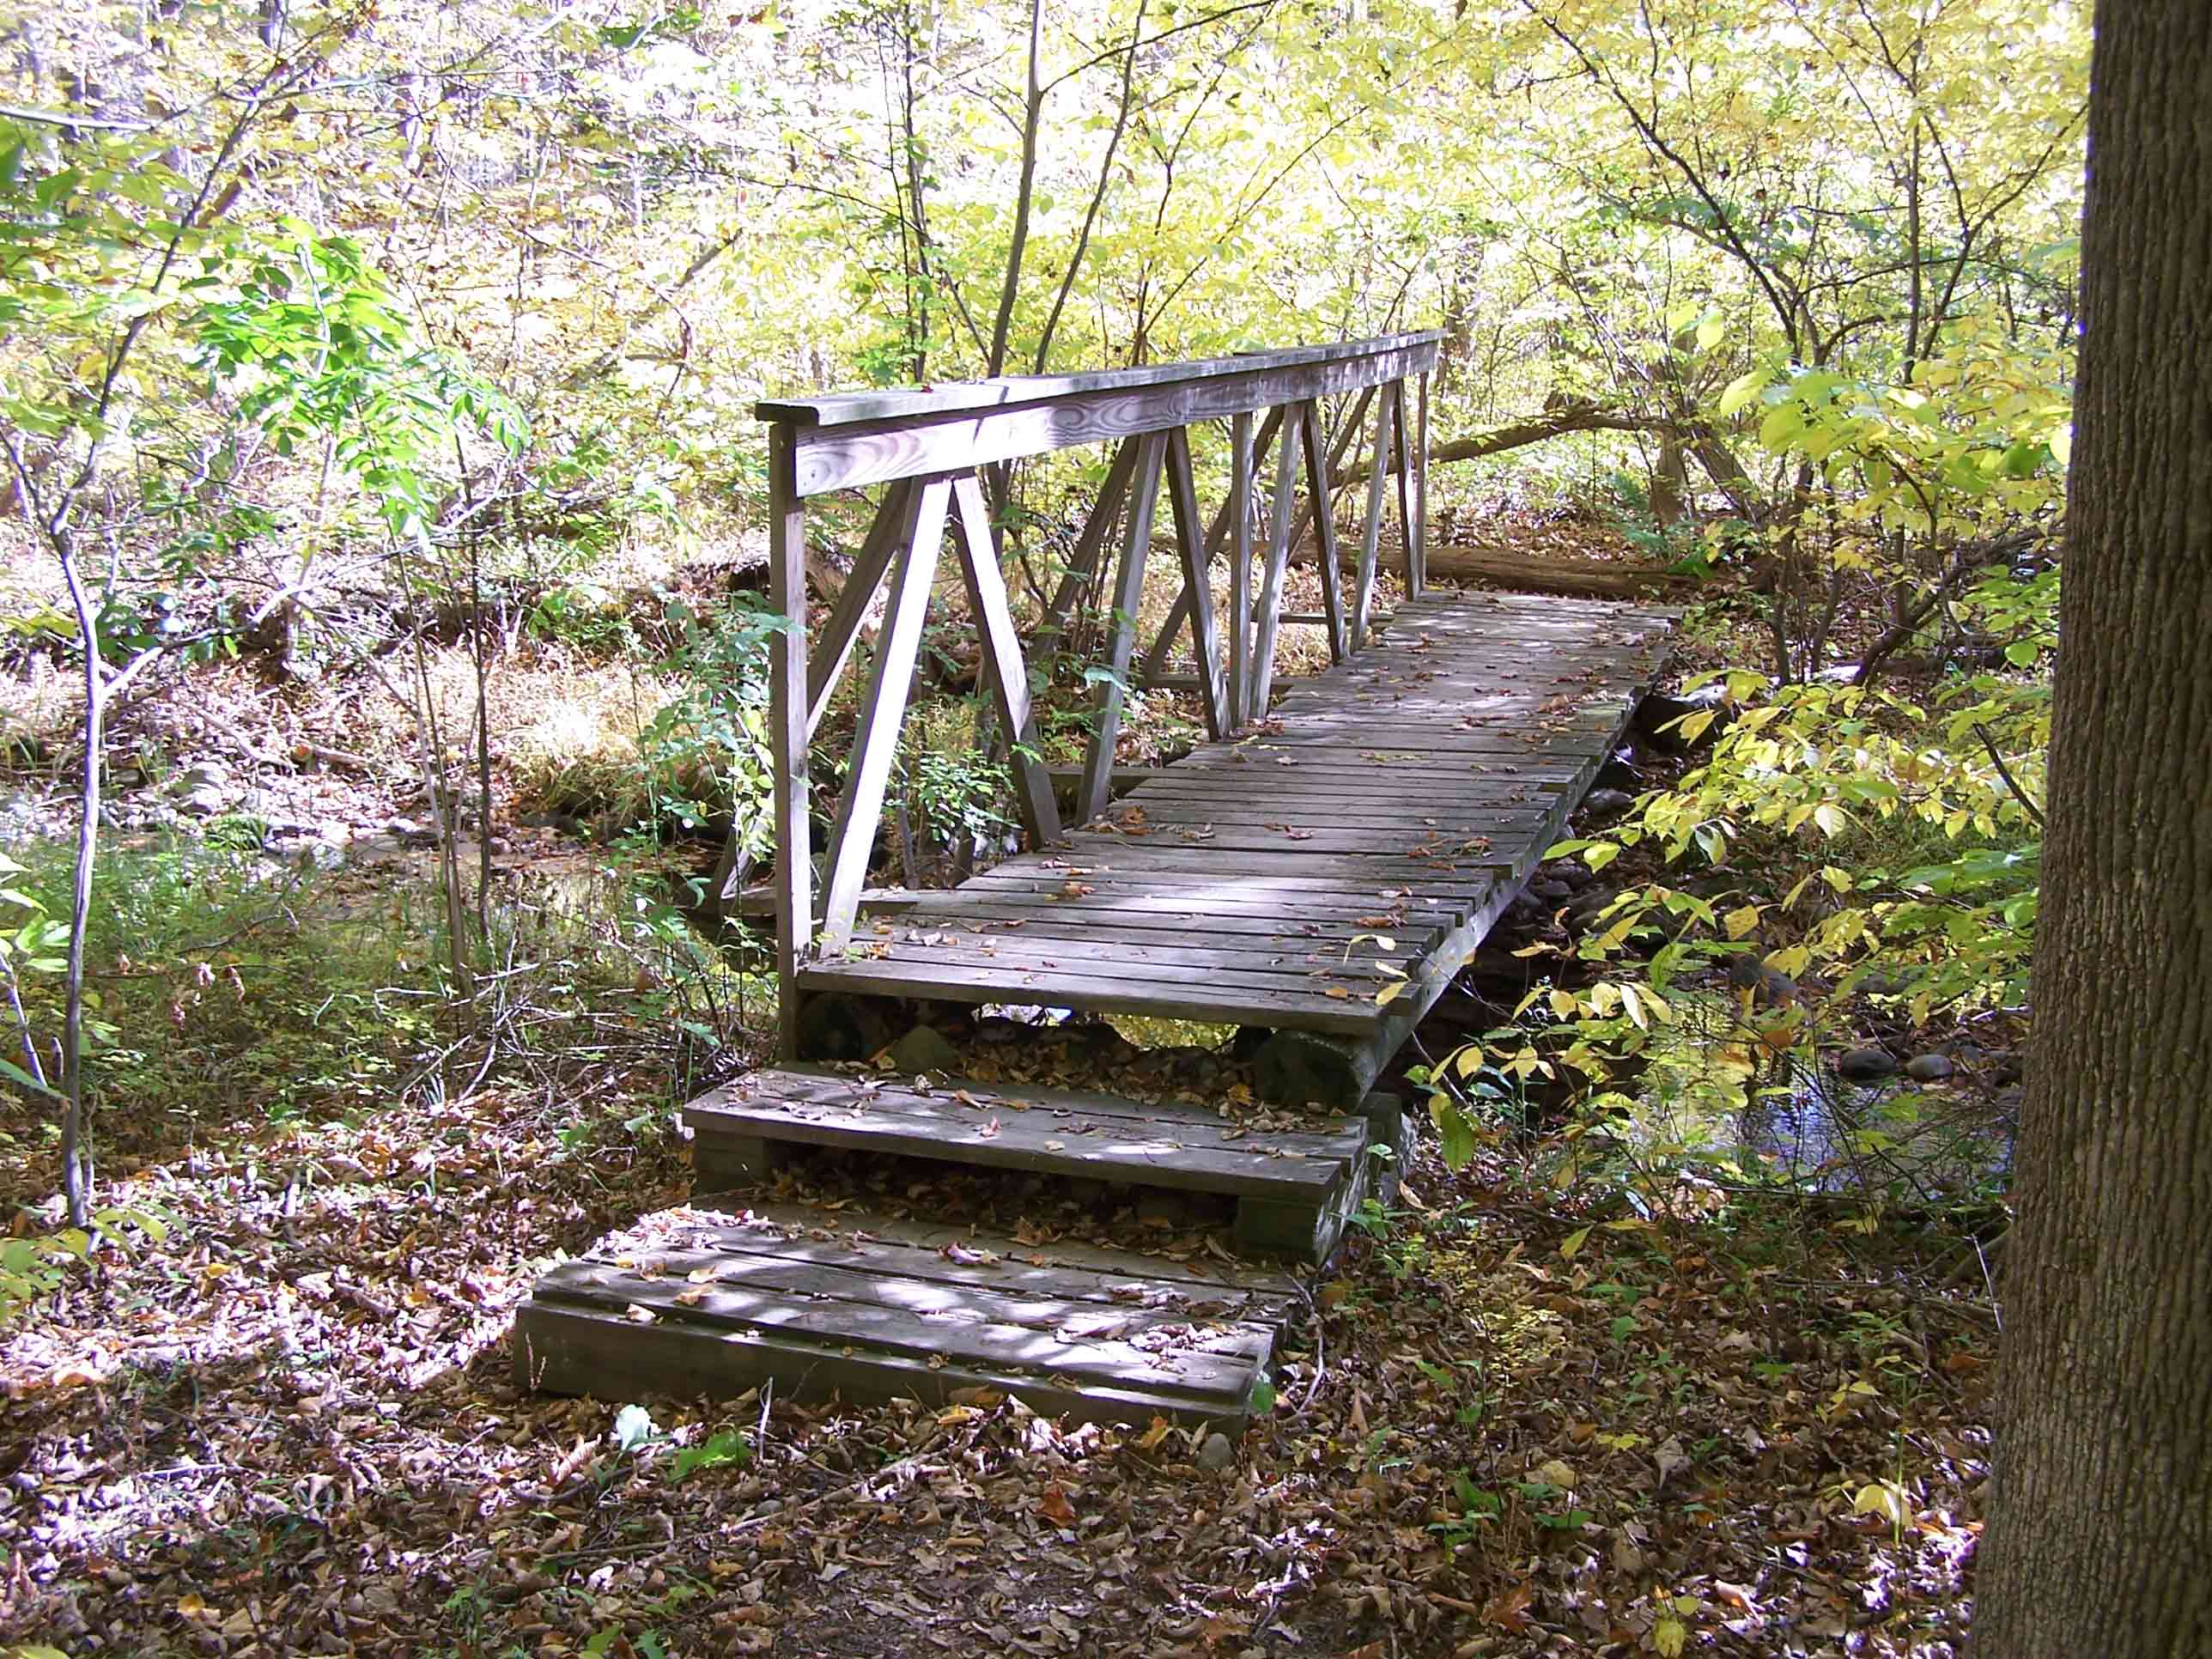 mm 4.1 - Wooden bridges over stream. Courtesy at@rohland.org